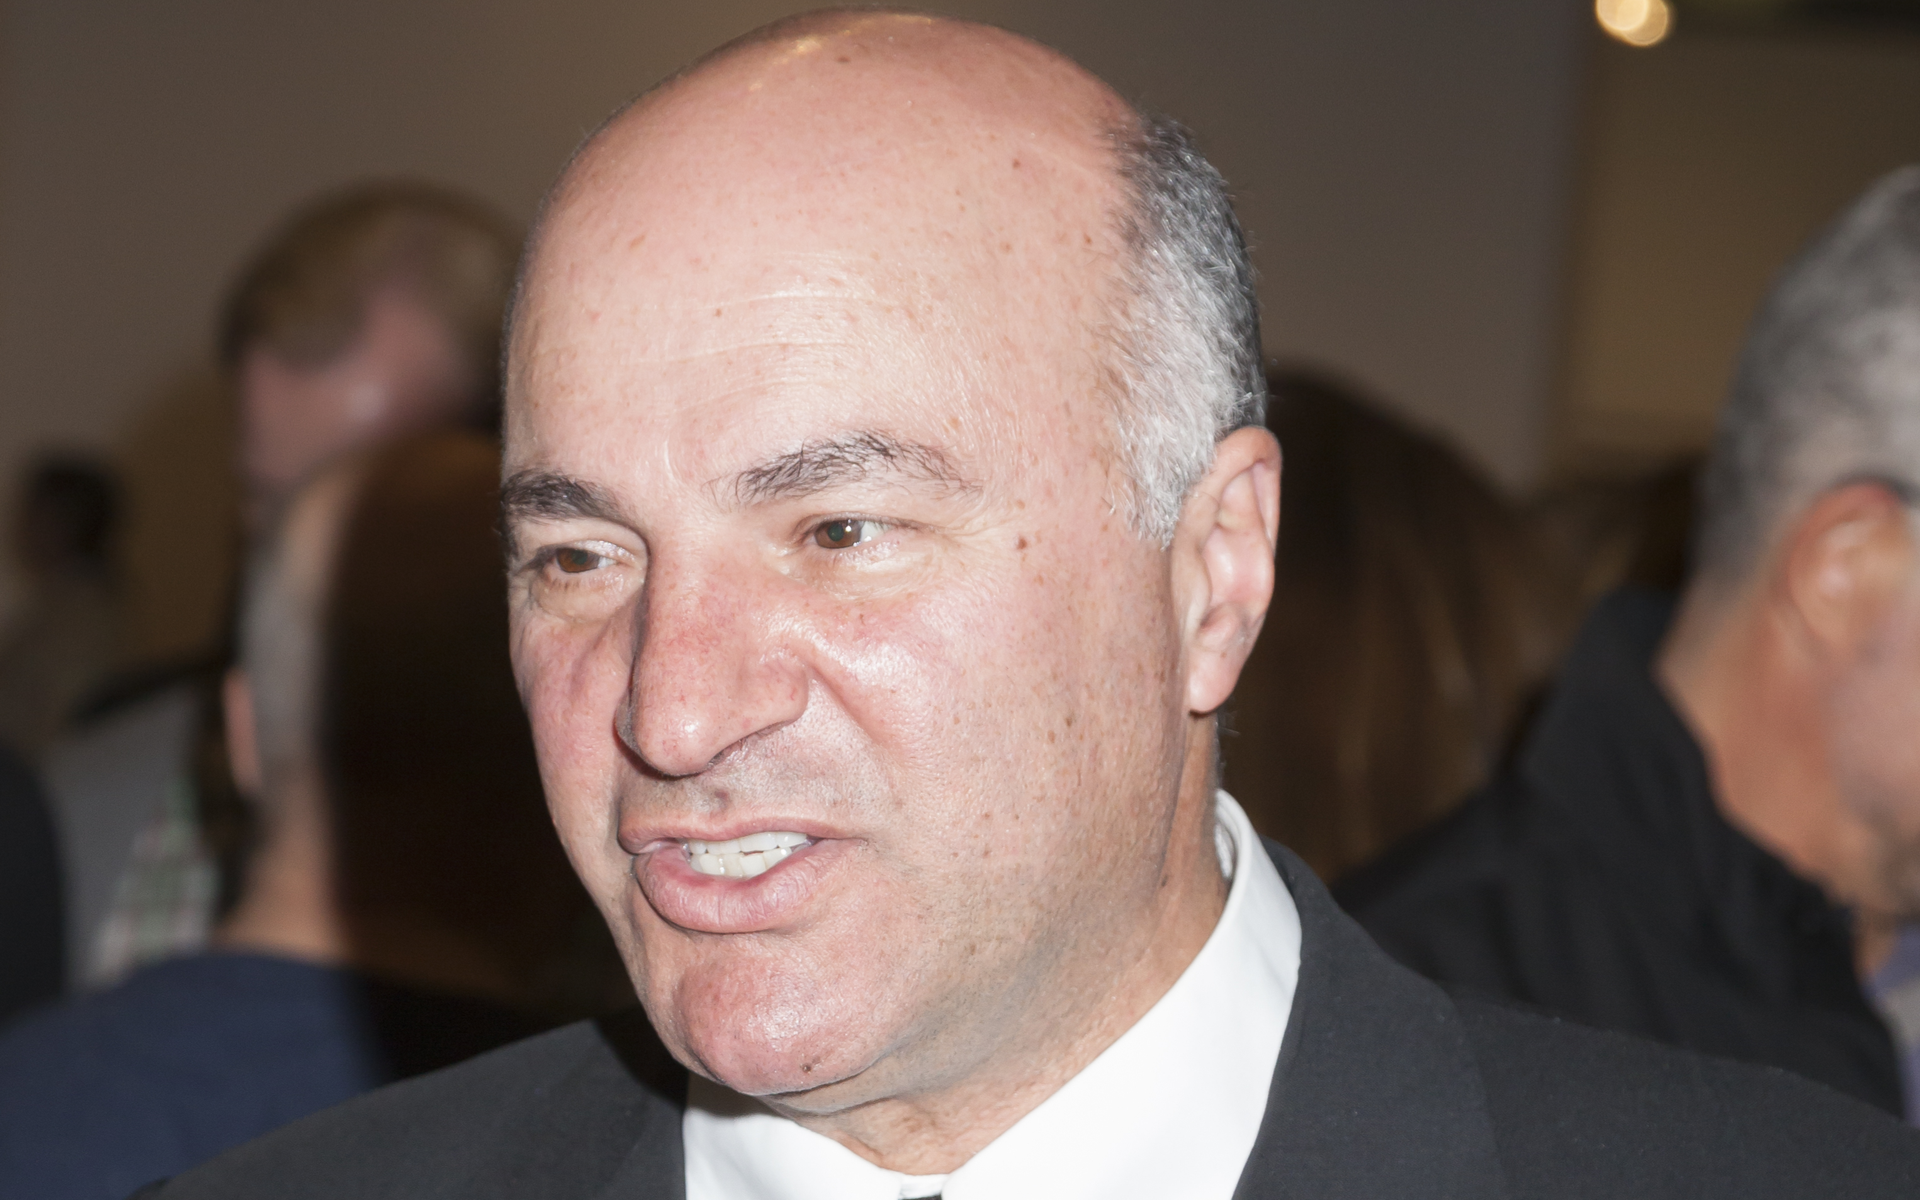 Kevin O'Leary bitcoin FTX